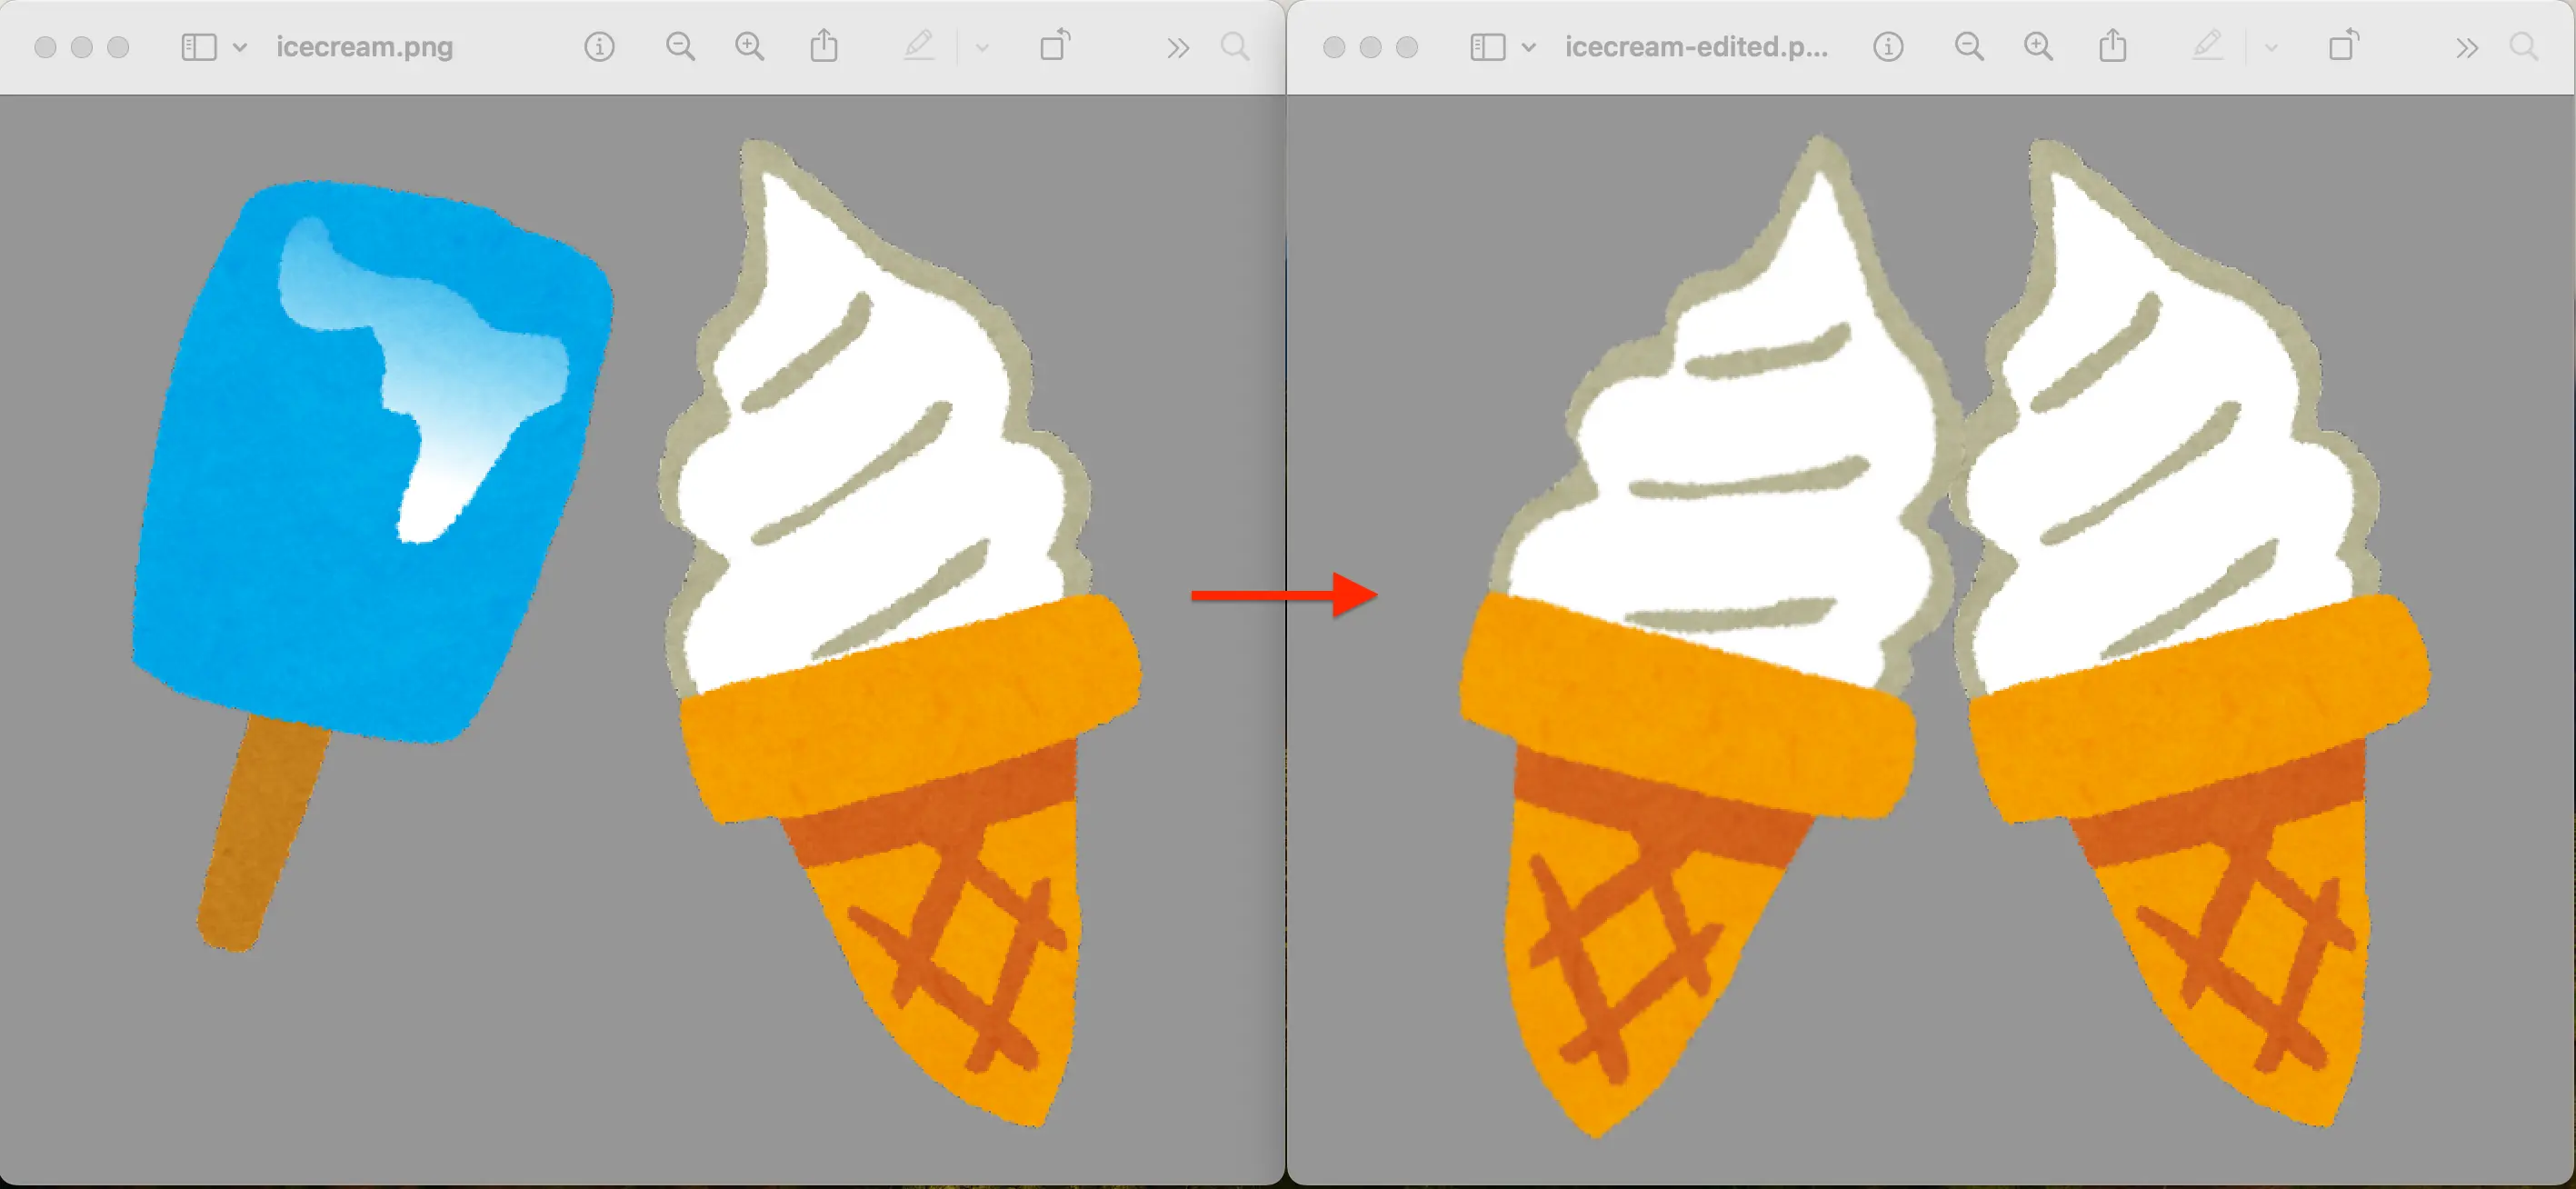 Image showing two adjacent pictures of ice cream. The image on the left features a popsicle and ice cream cone but the edited image on the right features two ice cream cones and no popsicle.